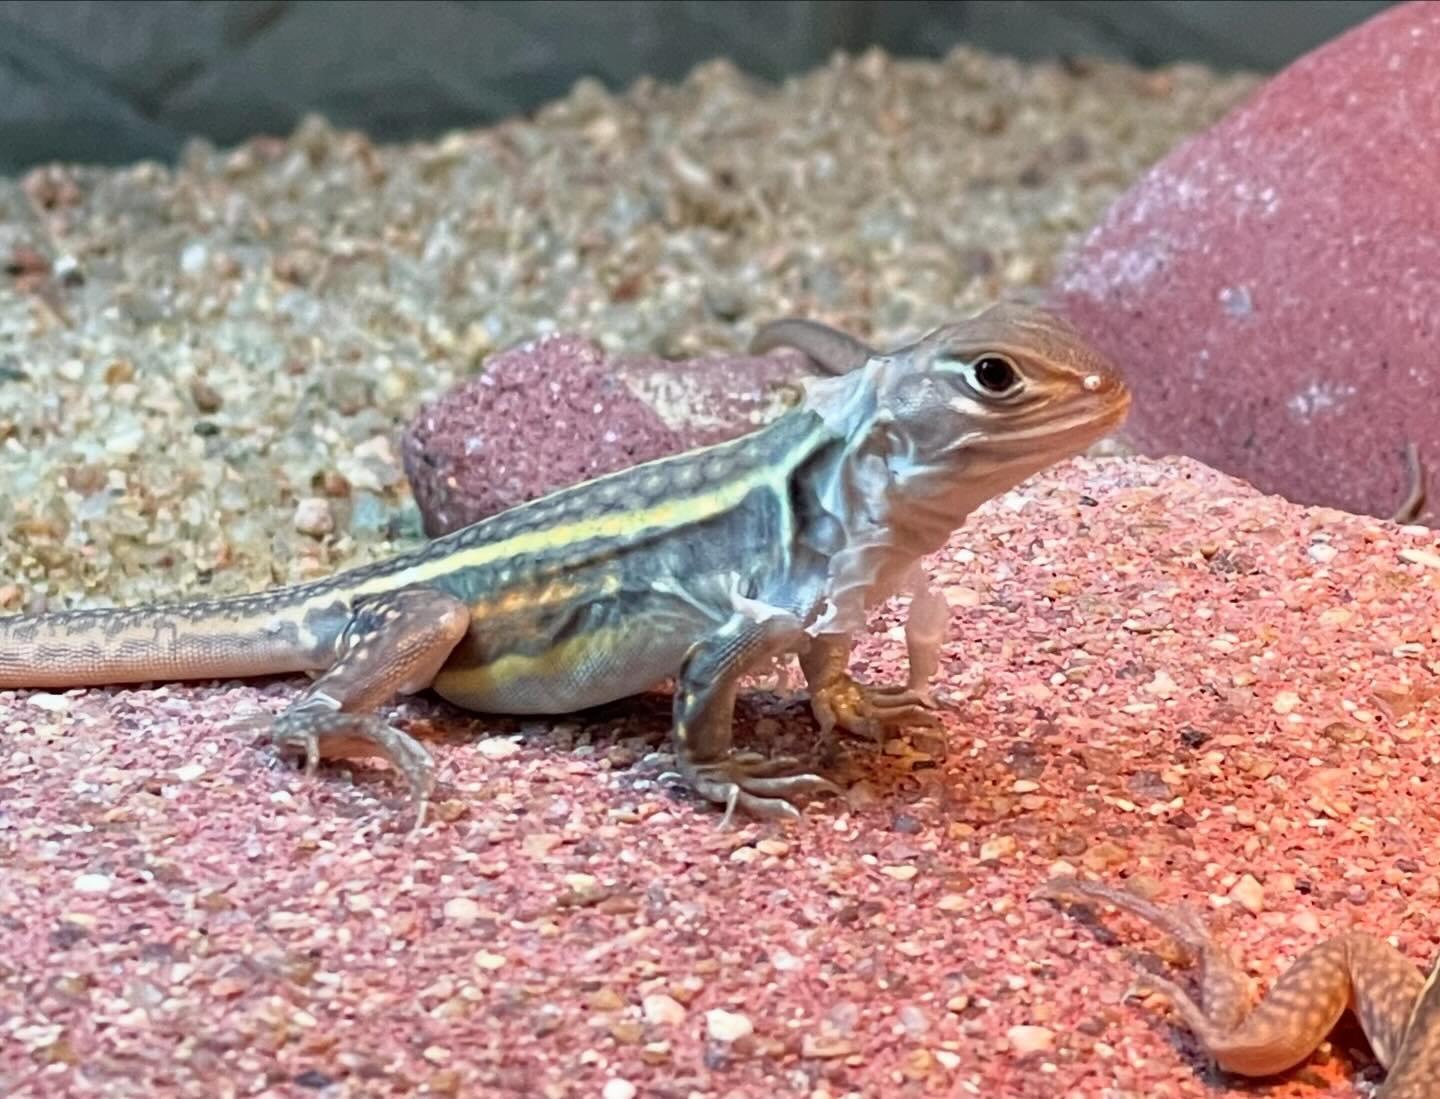 The baby Butterfly Agamas are really starting to gain momentum in their appetite. The scarf everything that moves and they also enjoy dandelion petals. #aridsonly #lizards #lizardsofinstagram #reptiles #reptilesofinstagram #leiolepis #leiolepisrubrit